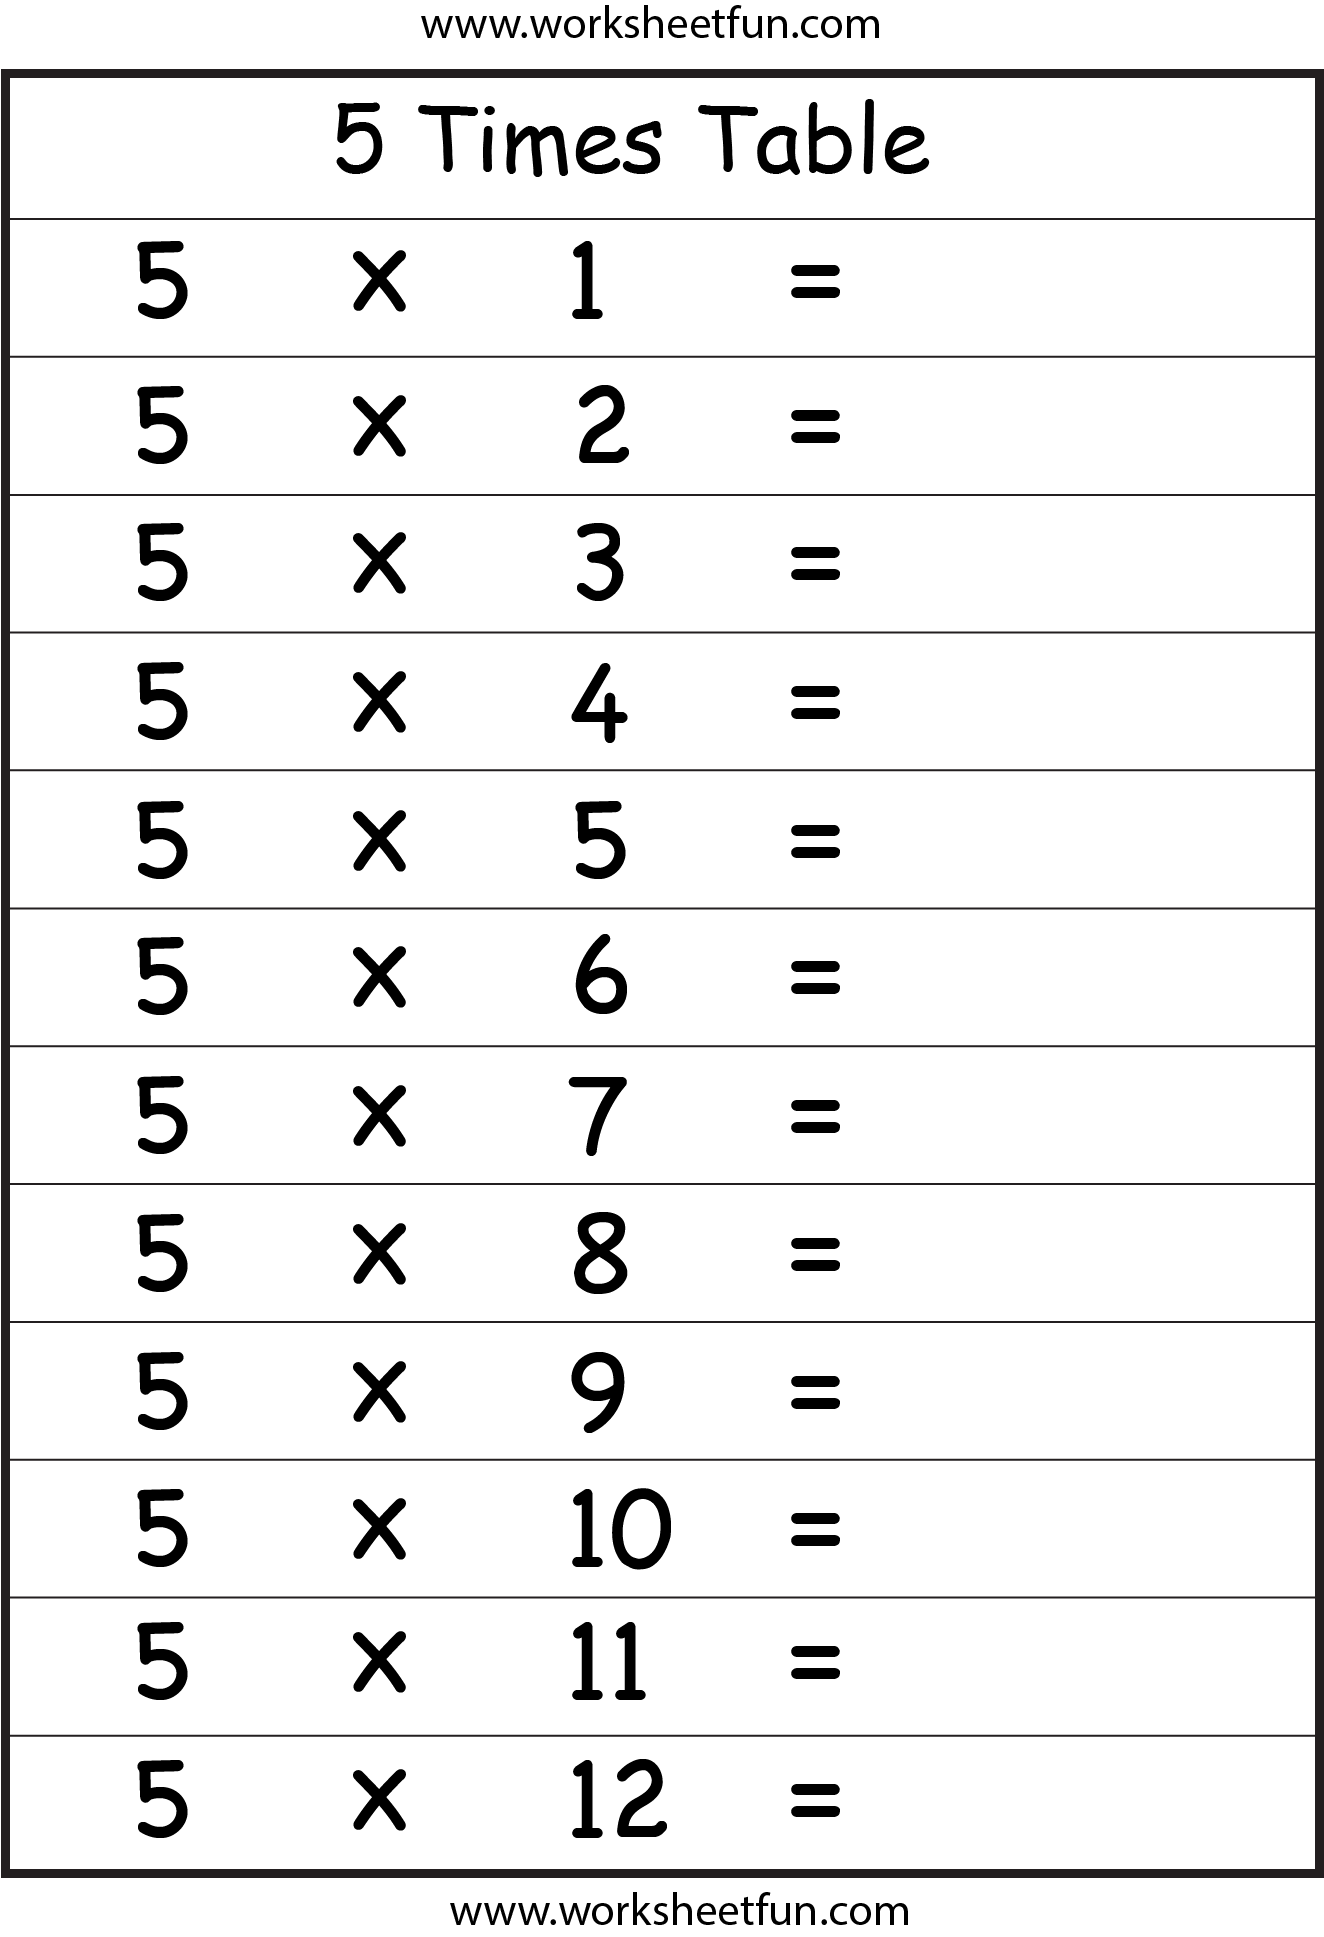 free-multiplication-worksheet-1s-and-2s-free4classrooms